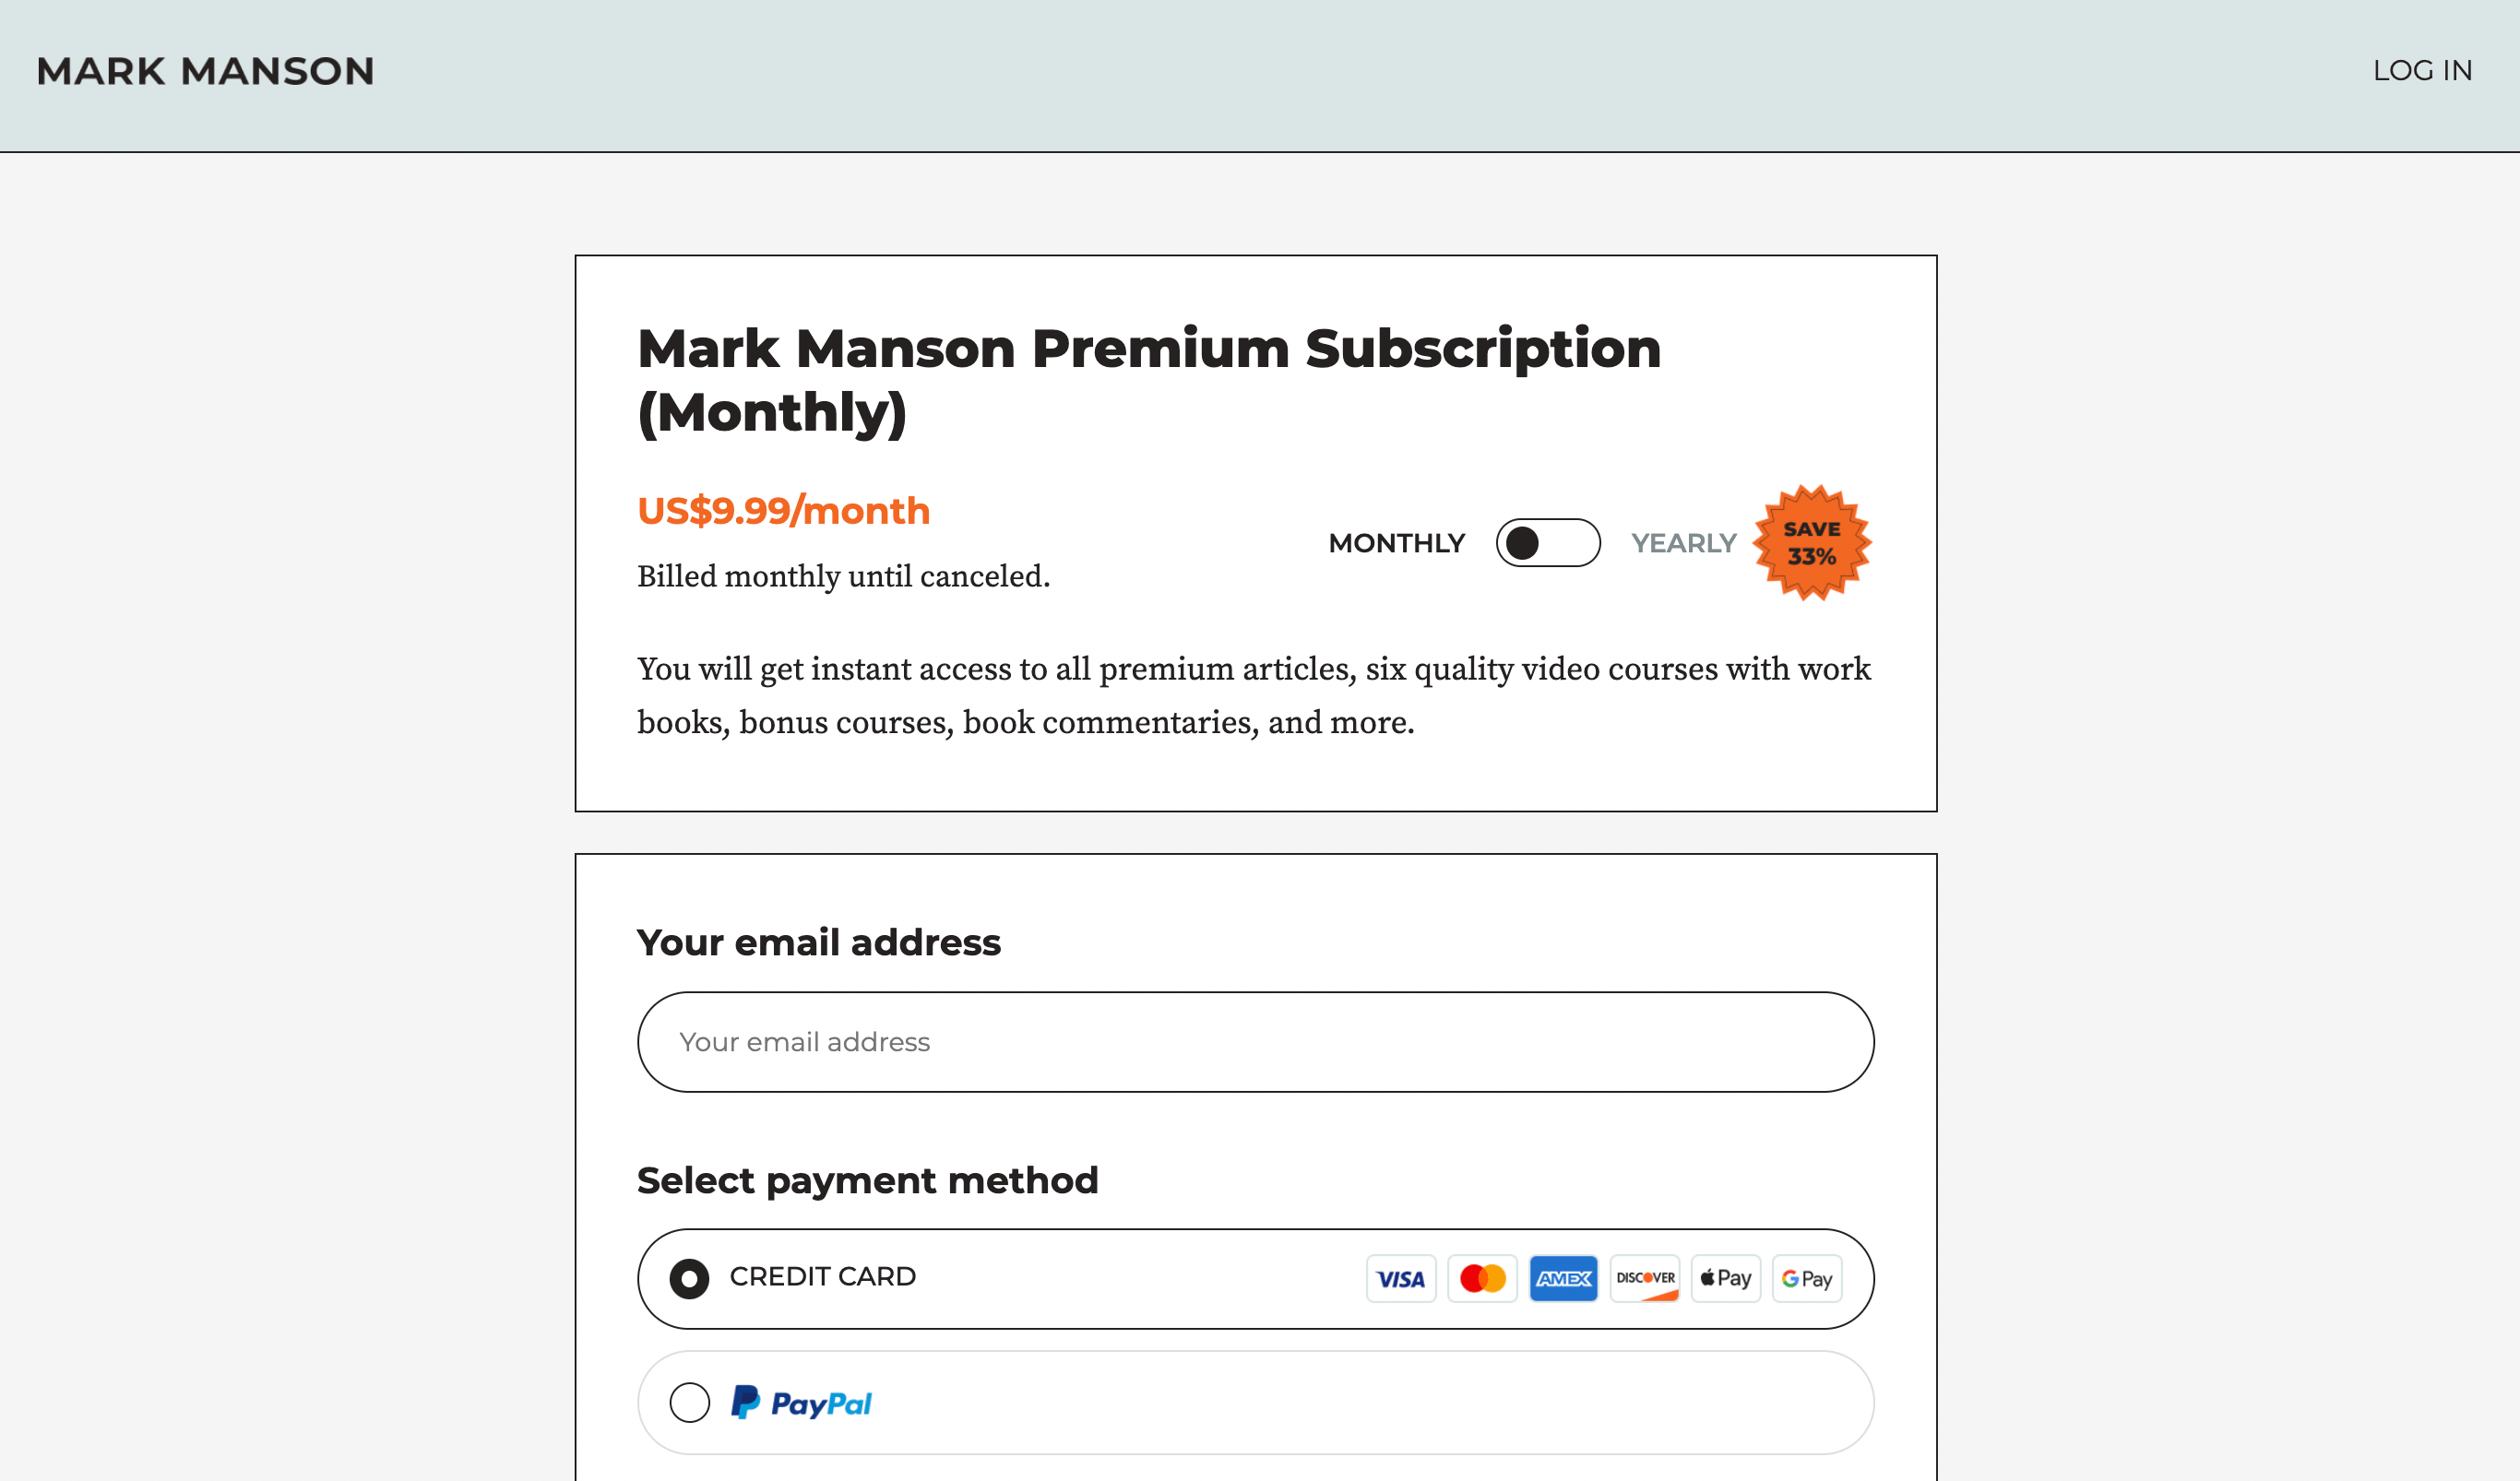 Mark Manson's subscription pricing plans